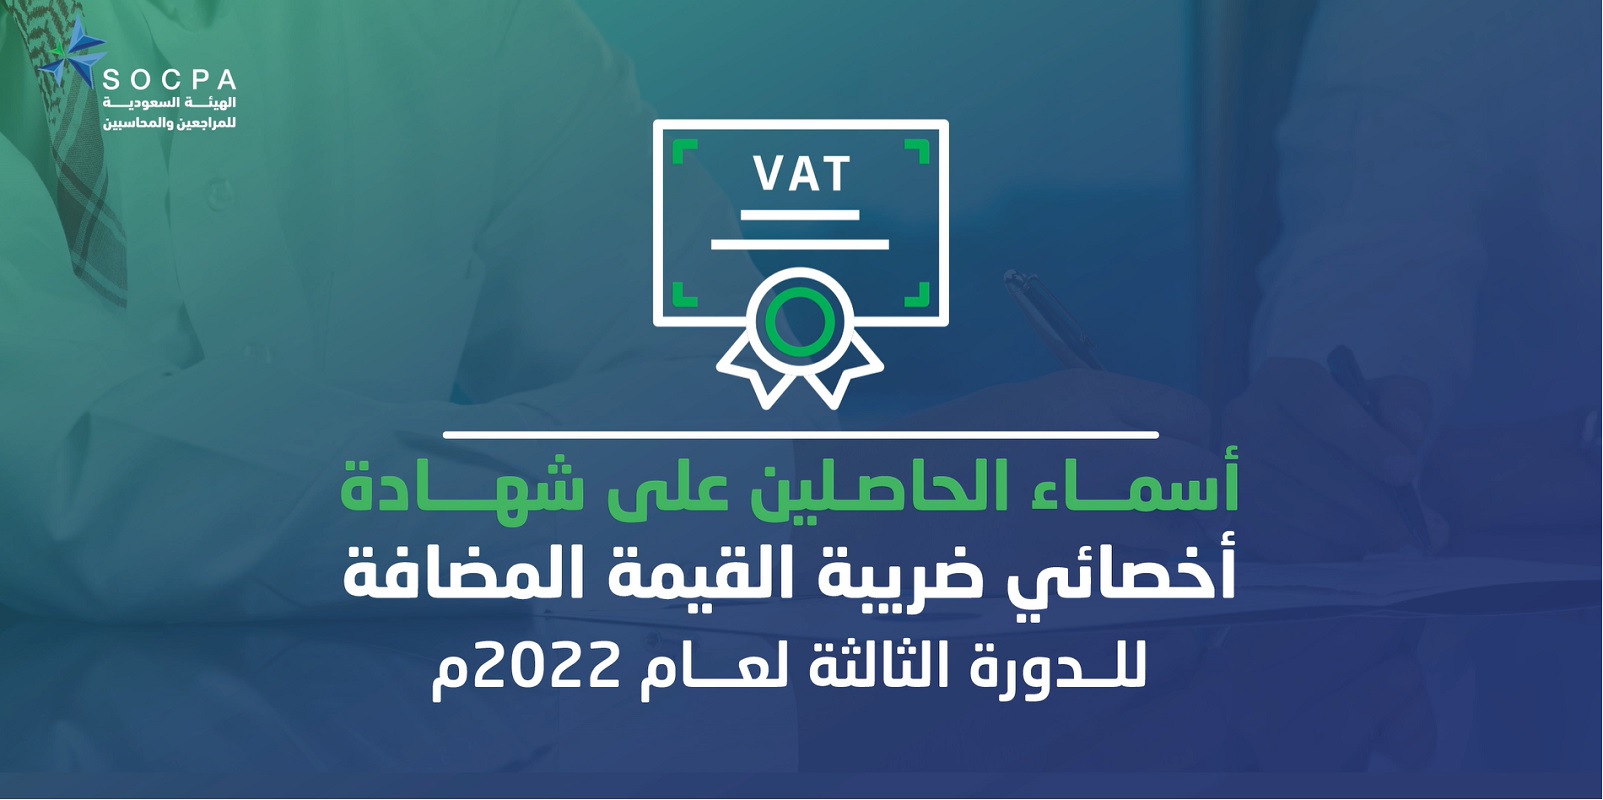 SOCPA Announces the Names of Recently Certified VAT Specialists 